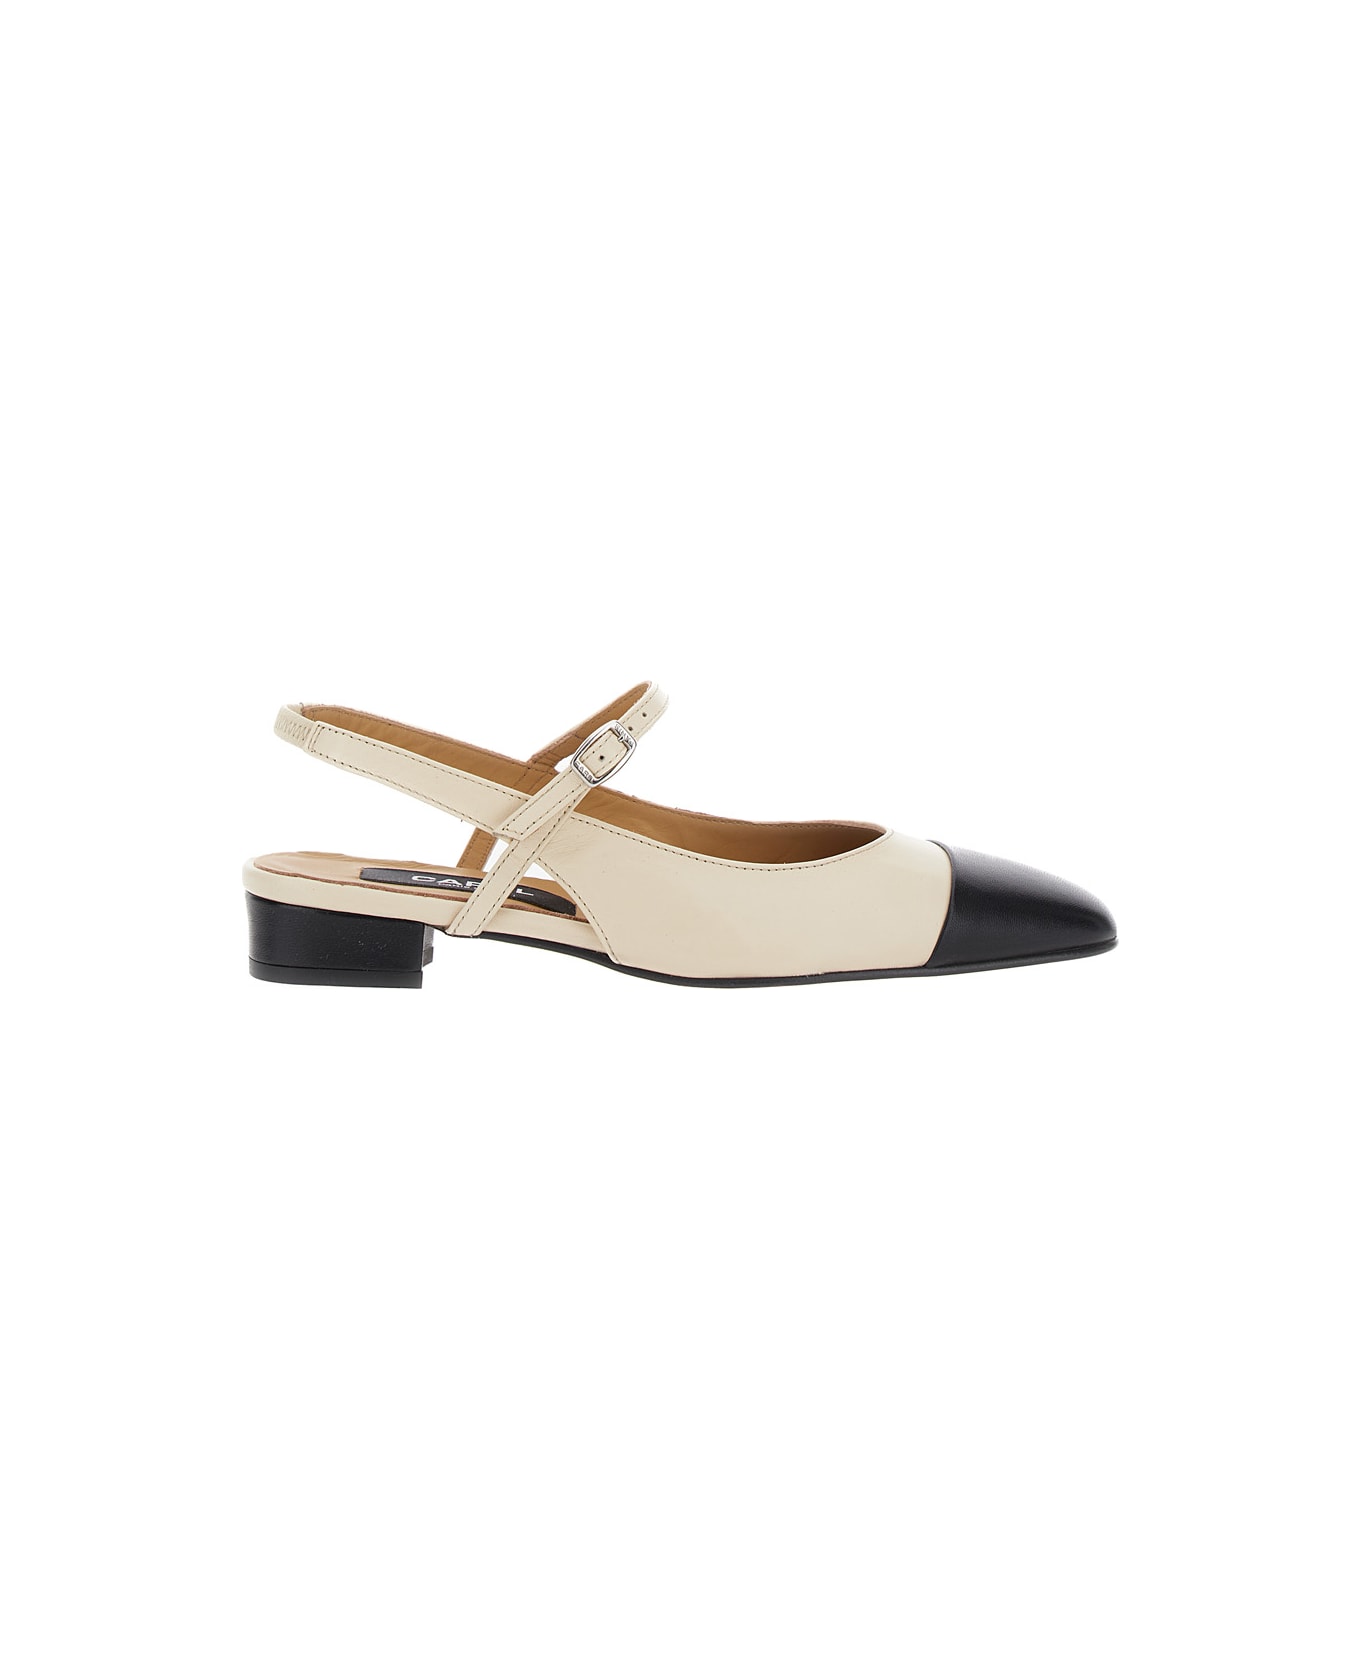 Carel White Slingback Pumps With Contrasting Toe In Leather Woman - Beige フラットシューズ